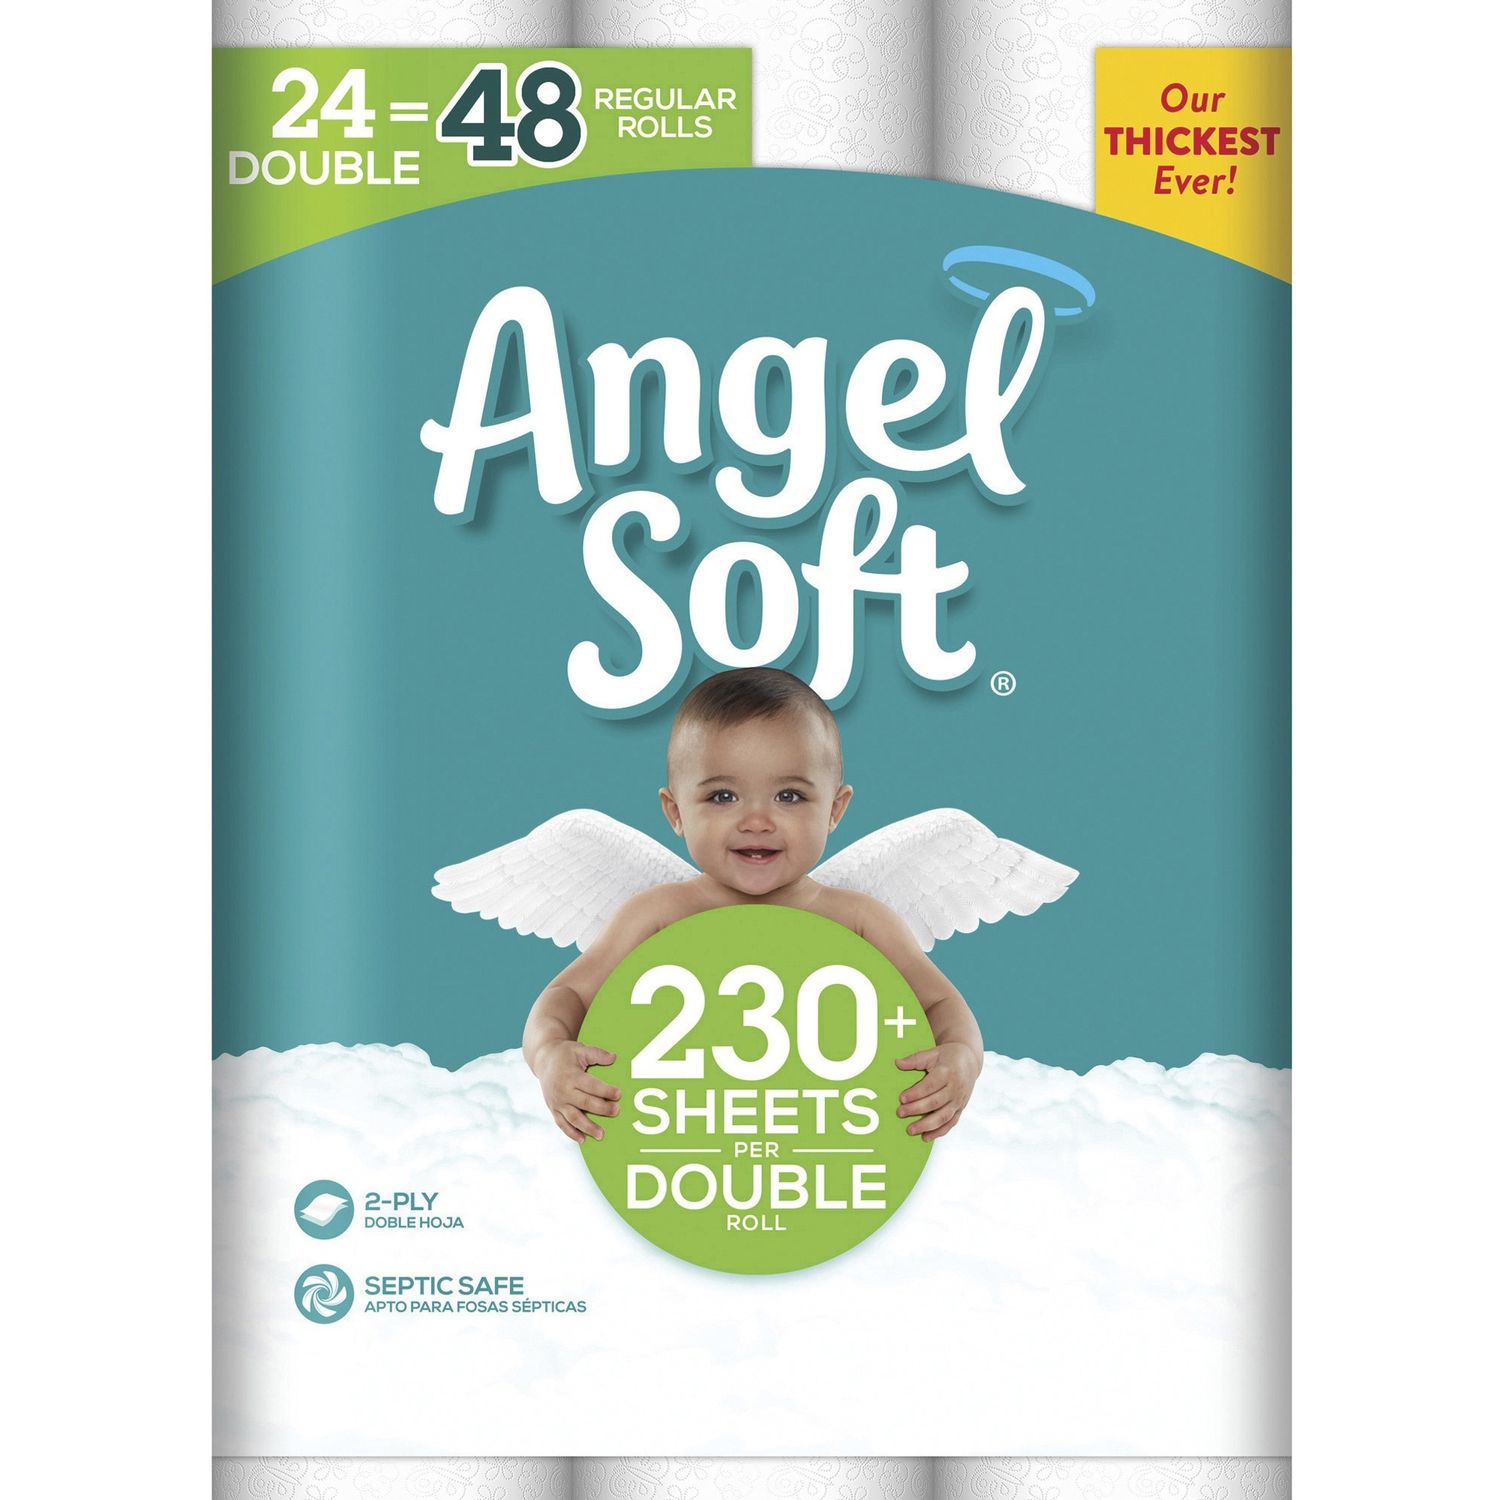 Double-Roll Toilet Paper 2 Ply, White, Durable, Soft, Septic Safe, For Bathroom, 24 / Pack